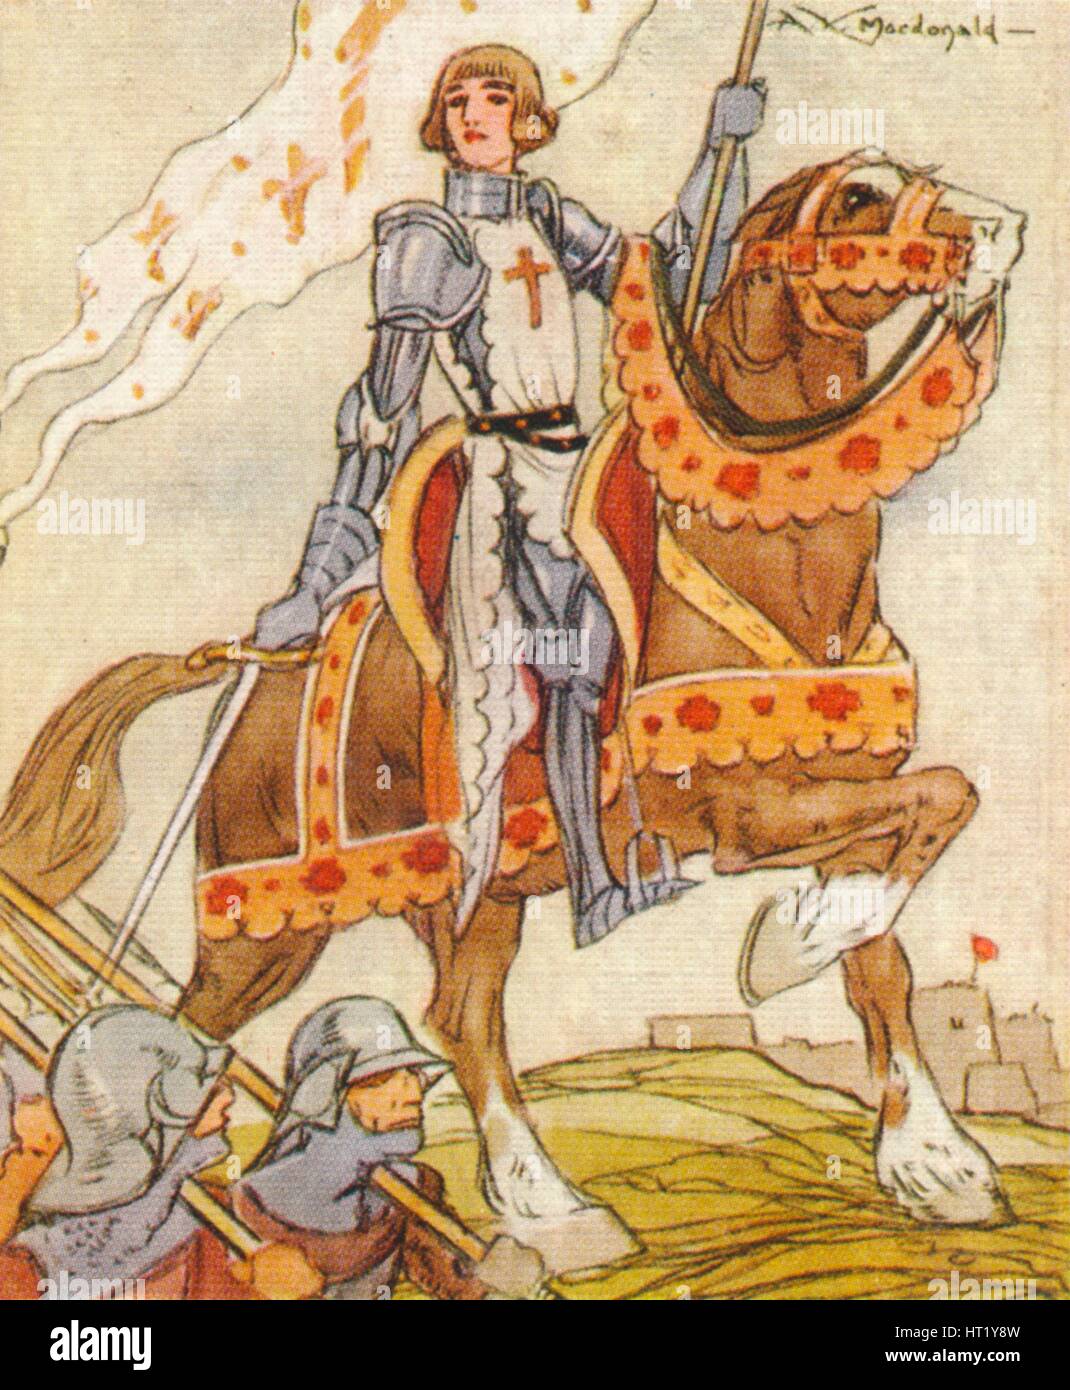 Joan of Arc, (c1412-1431) 15th century French patriot and martyr, 1937. Artist: Alexander K MacDonald Stock Photo